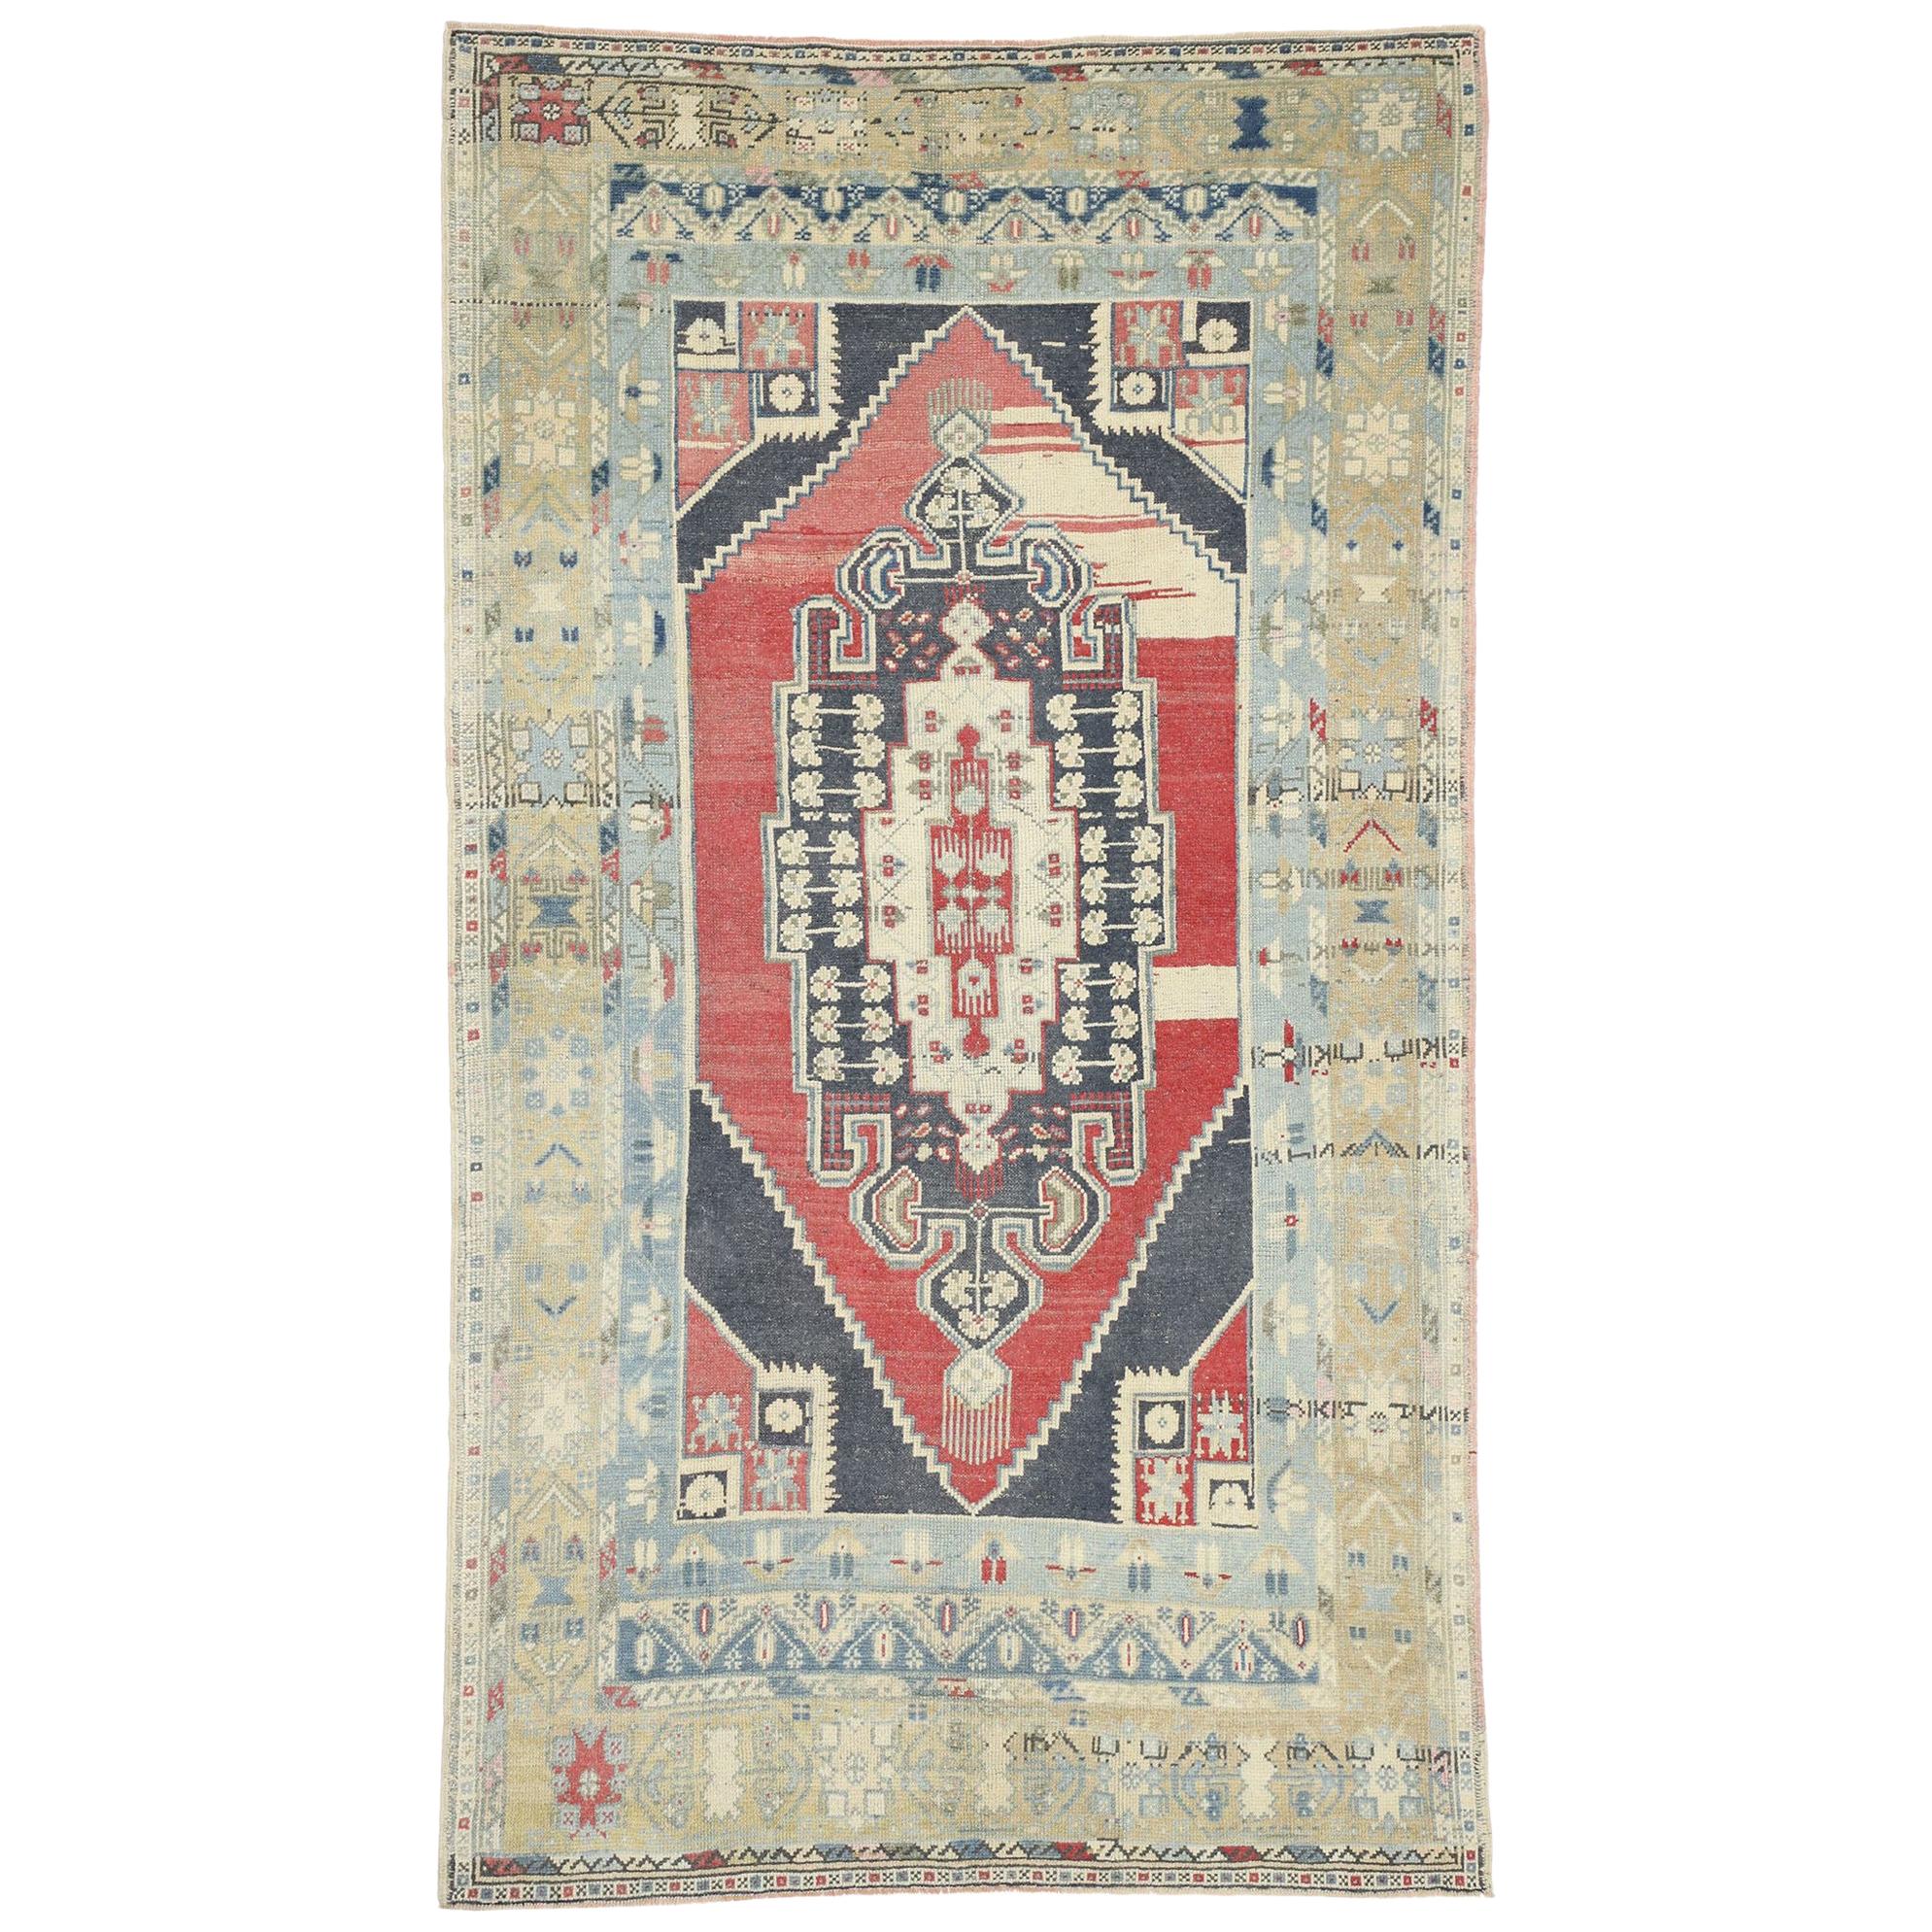 Vintage Turkish Oushak Rug with Relaxed Federal Style